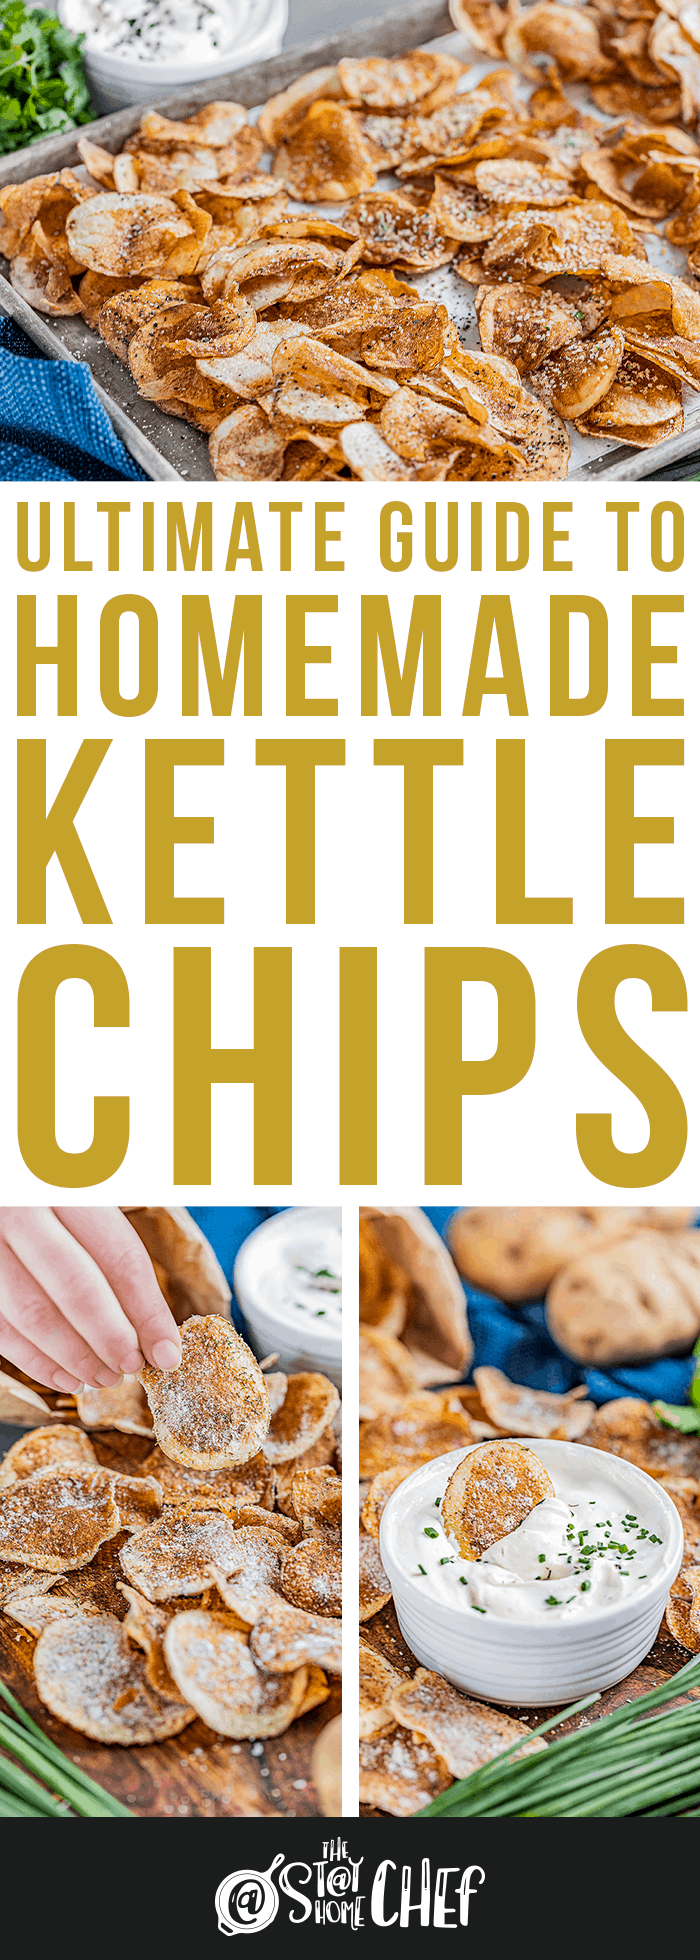 Ultimate Guide to Homemade Kettle Chips